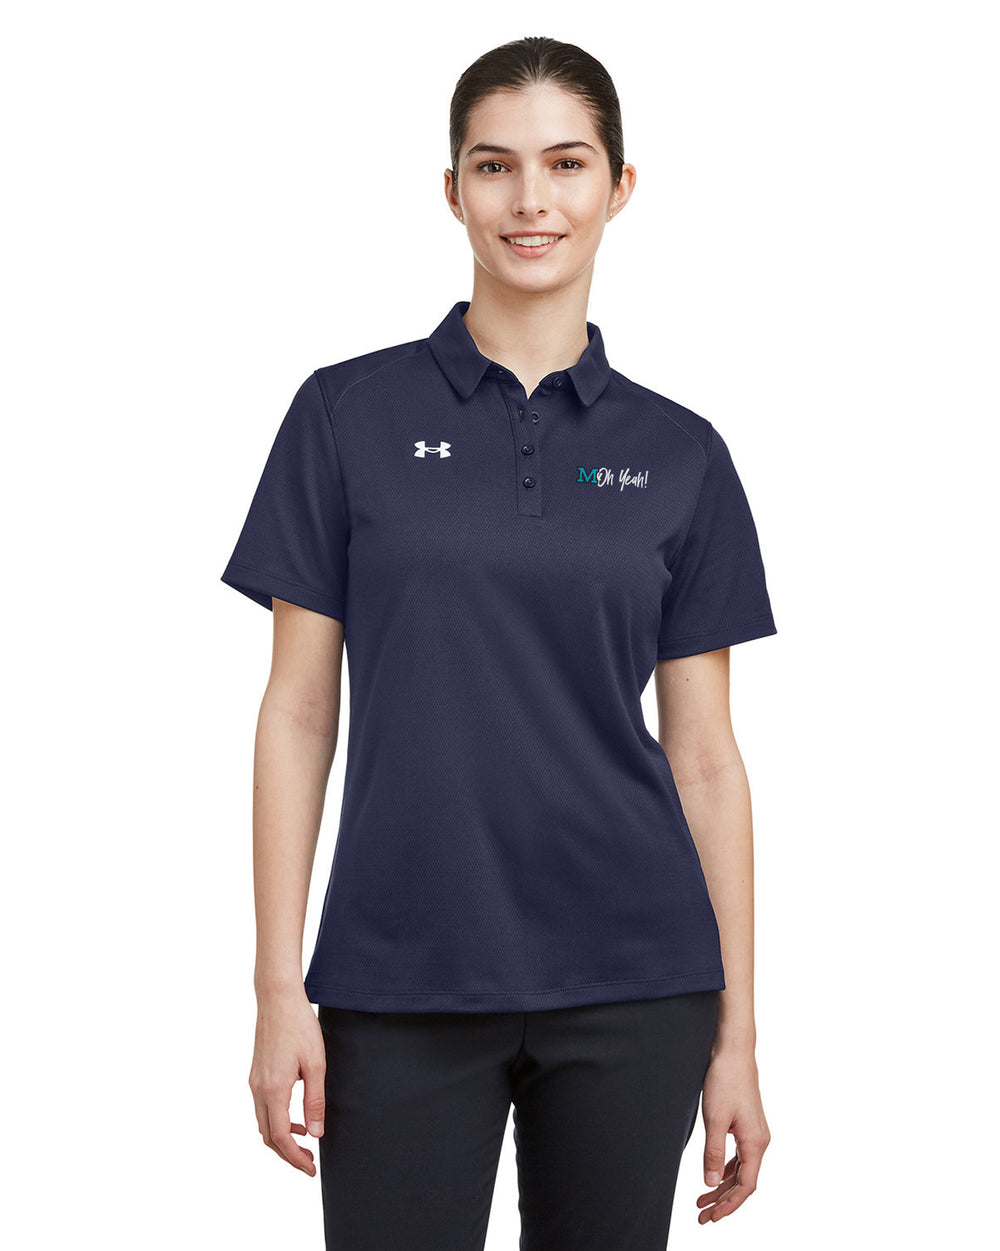 MOh Yeah - Under Armour Ladies' Tech Polo - 1370431